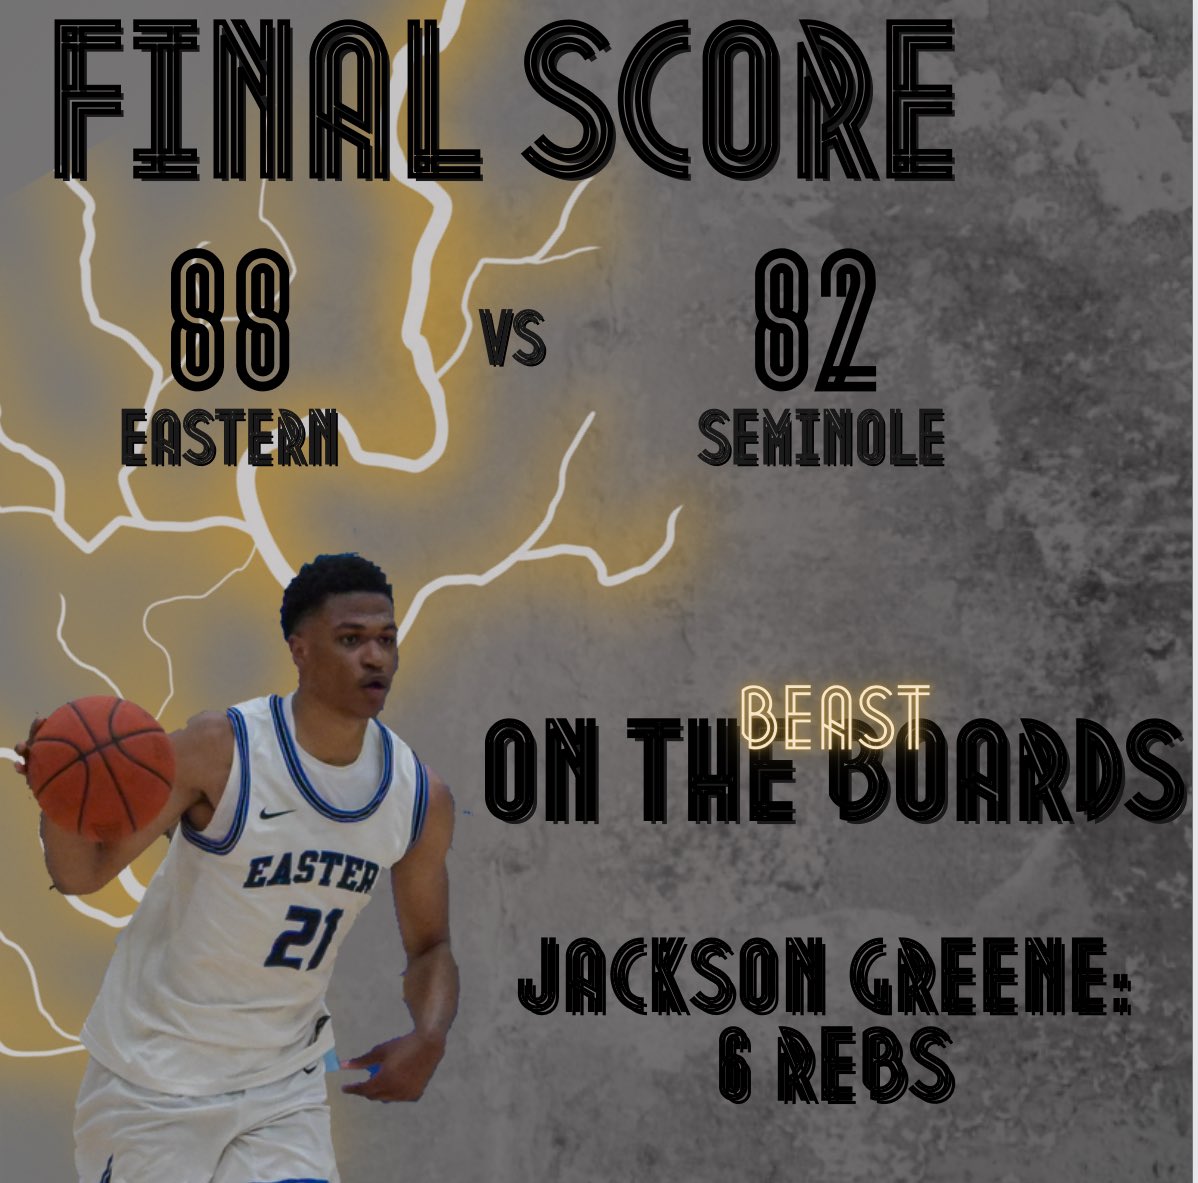 🏀Victory Update🏀 We secured a win on the road last night against Seminole with a final score of 88-82! 👊 Jackson Greene earns 'The Beast on the Boards Award' with a team-high of 6 rebounds! 📆 Next game at home on Monday. Let's keep it going! 🔥